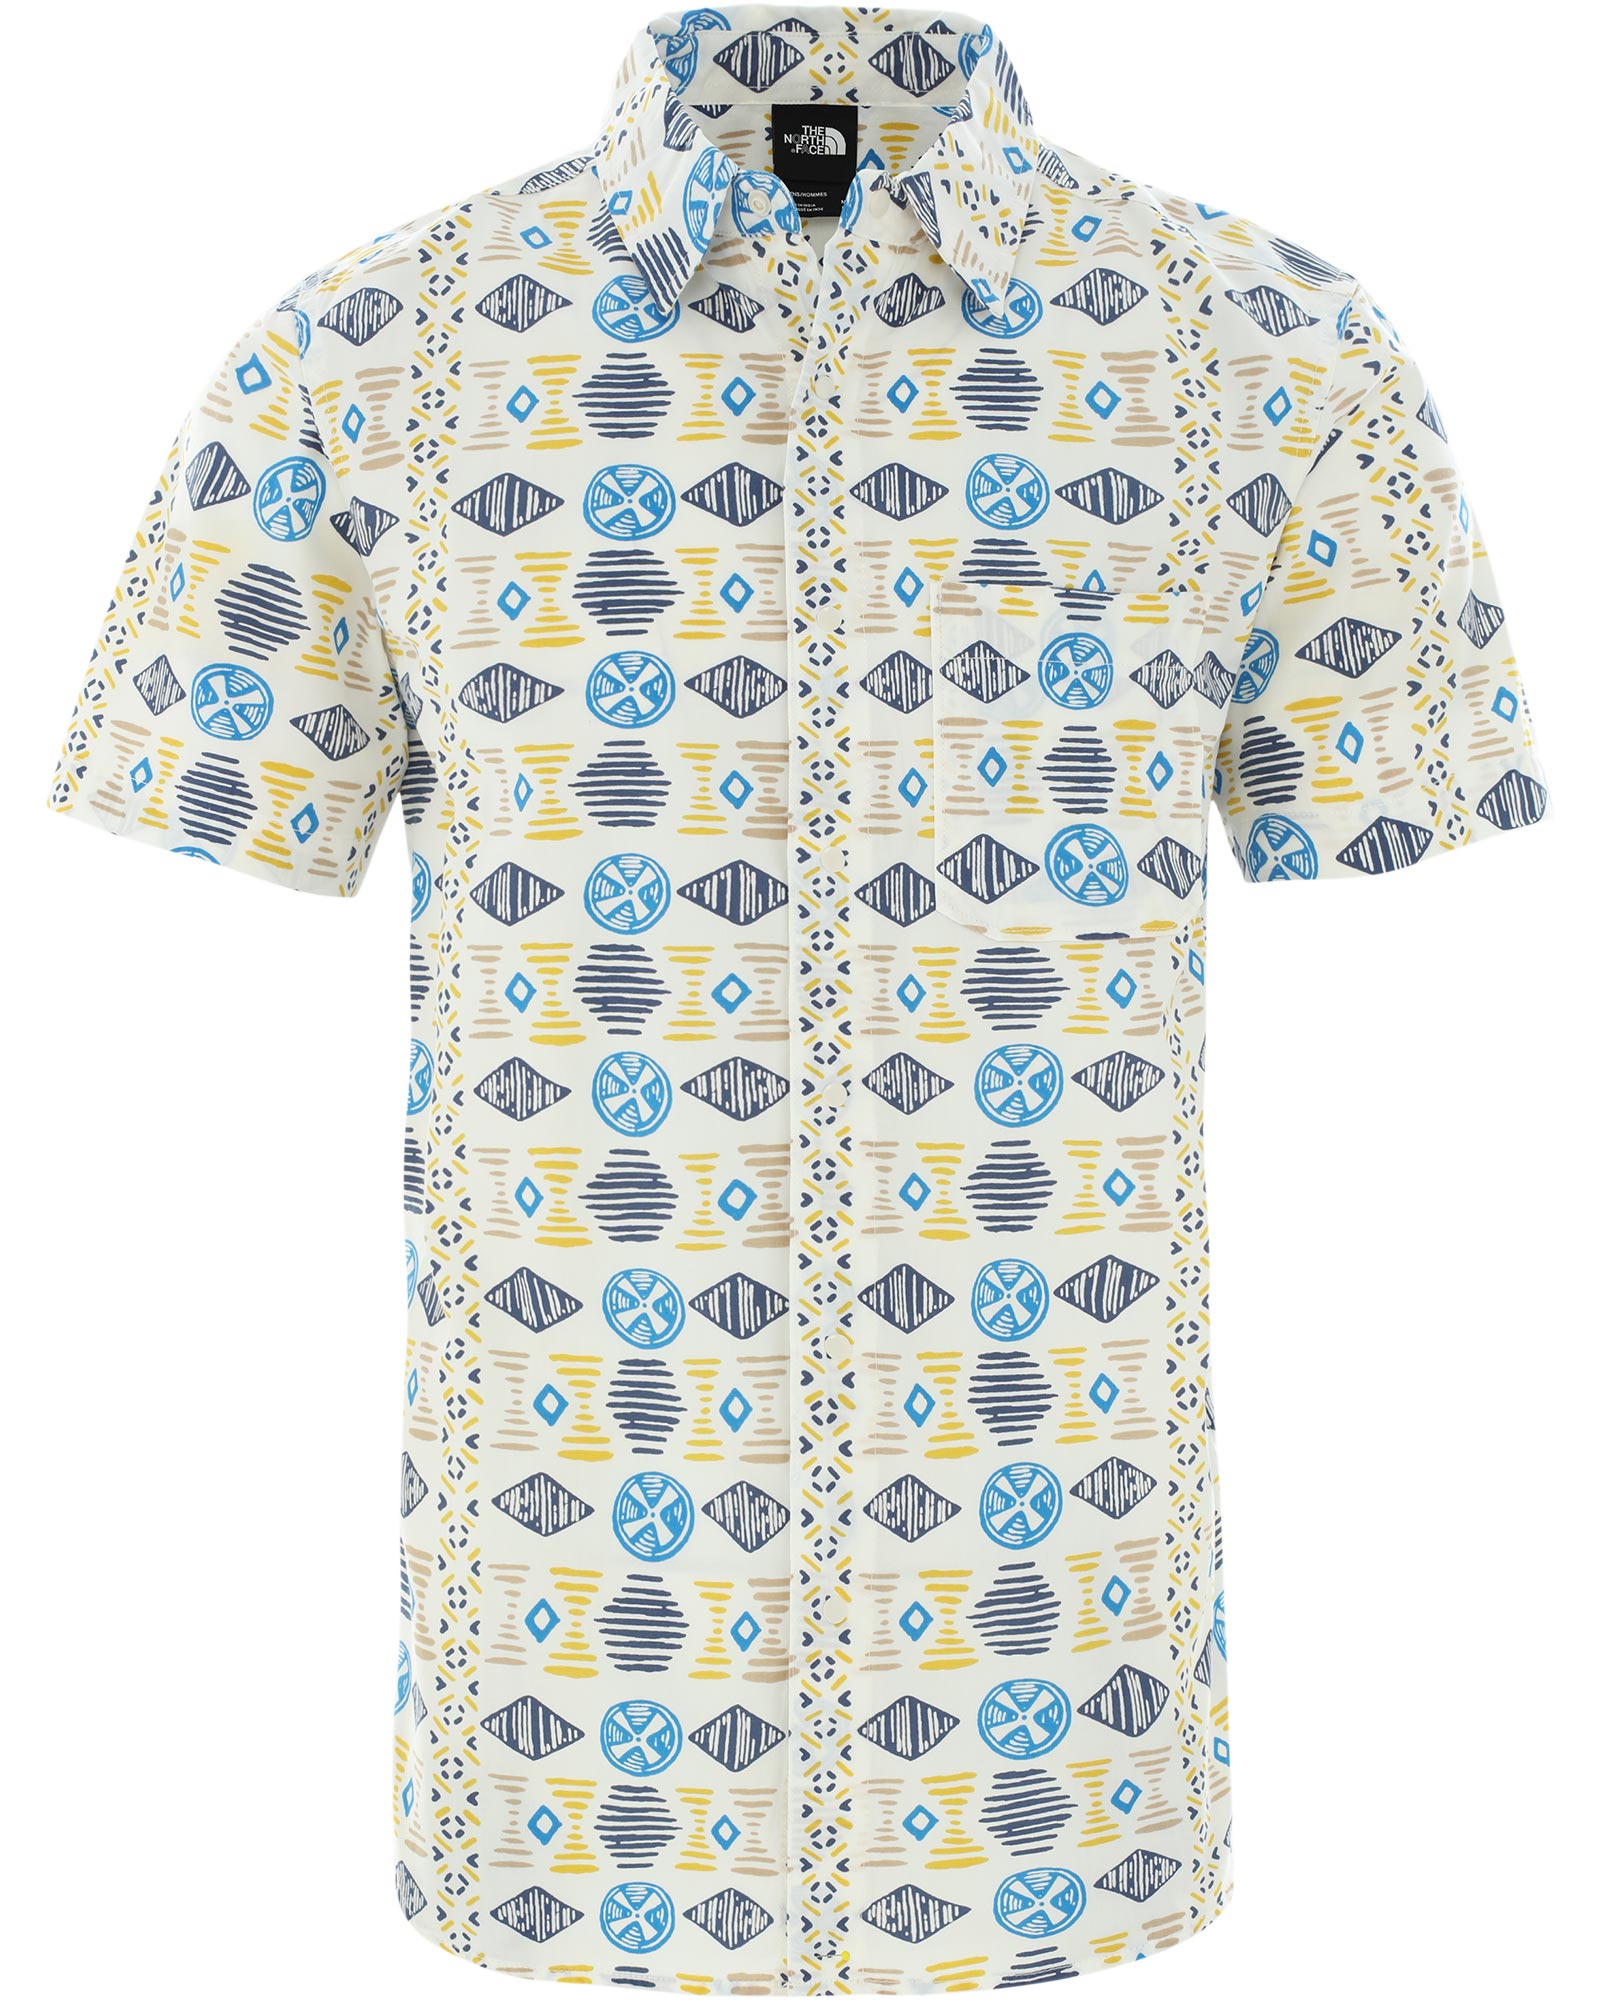 The North Face Baytrail Print Men’s Shirt - Vintage White Song Print S